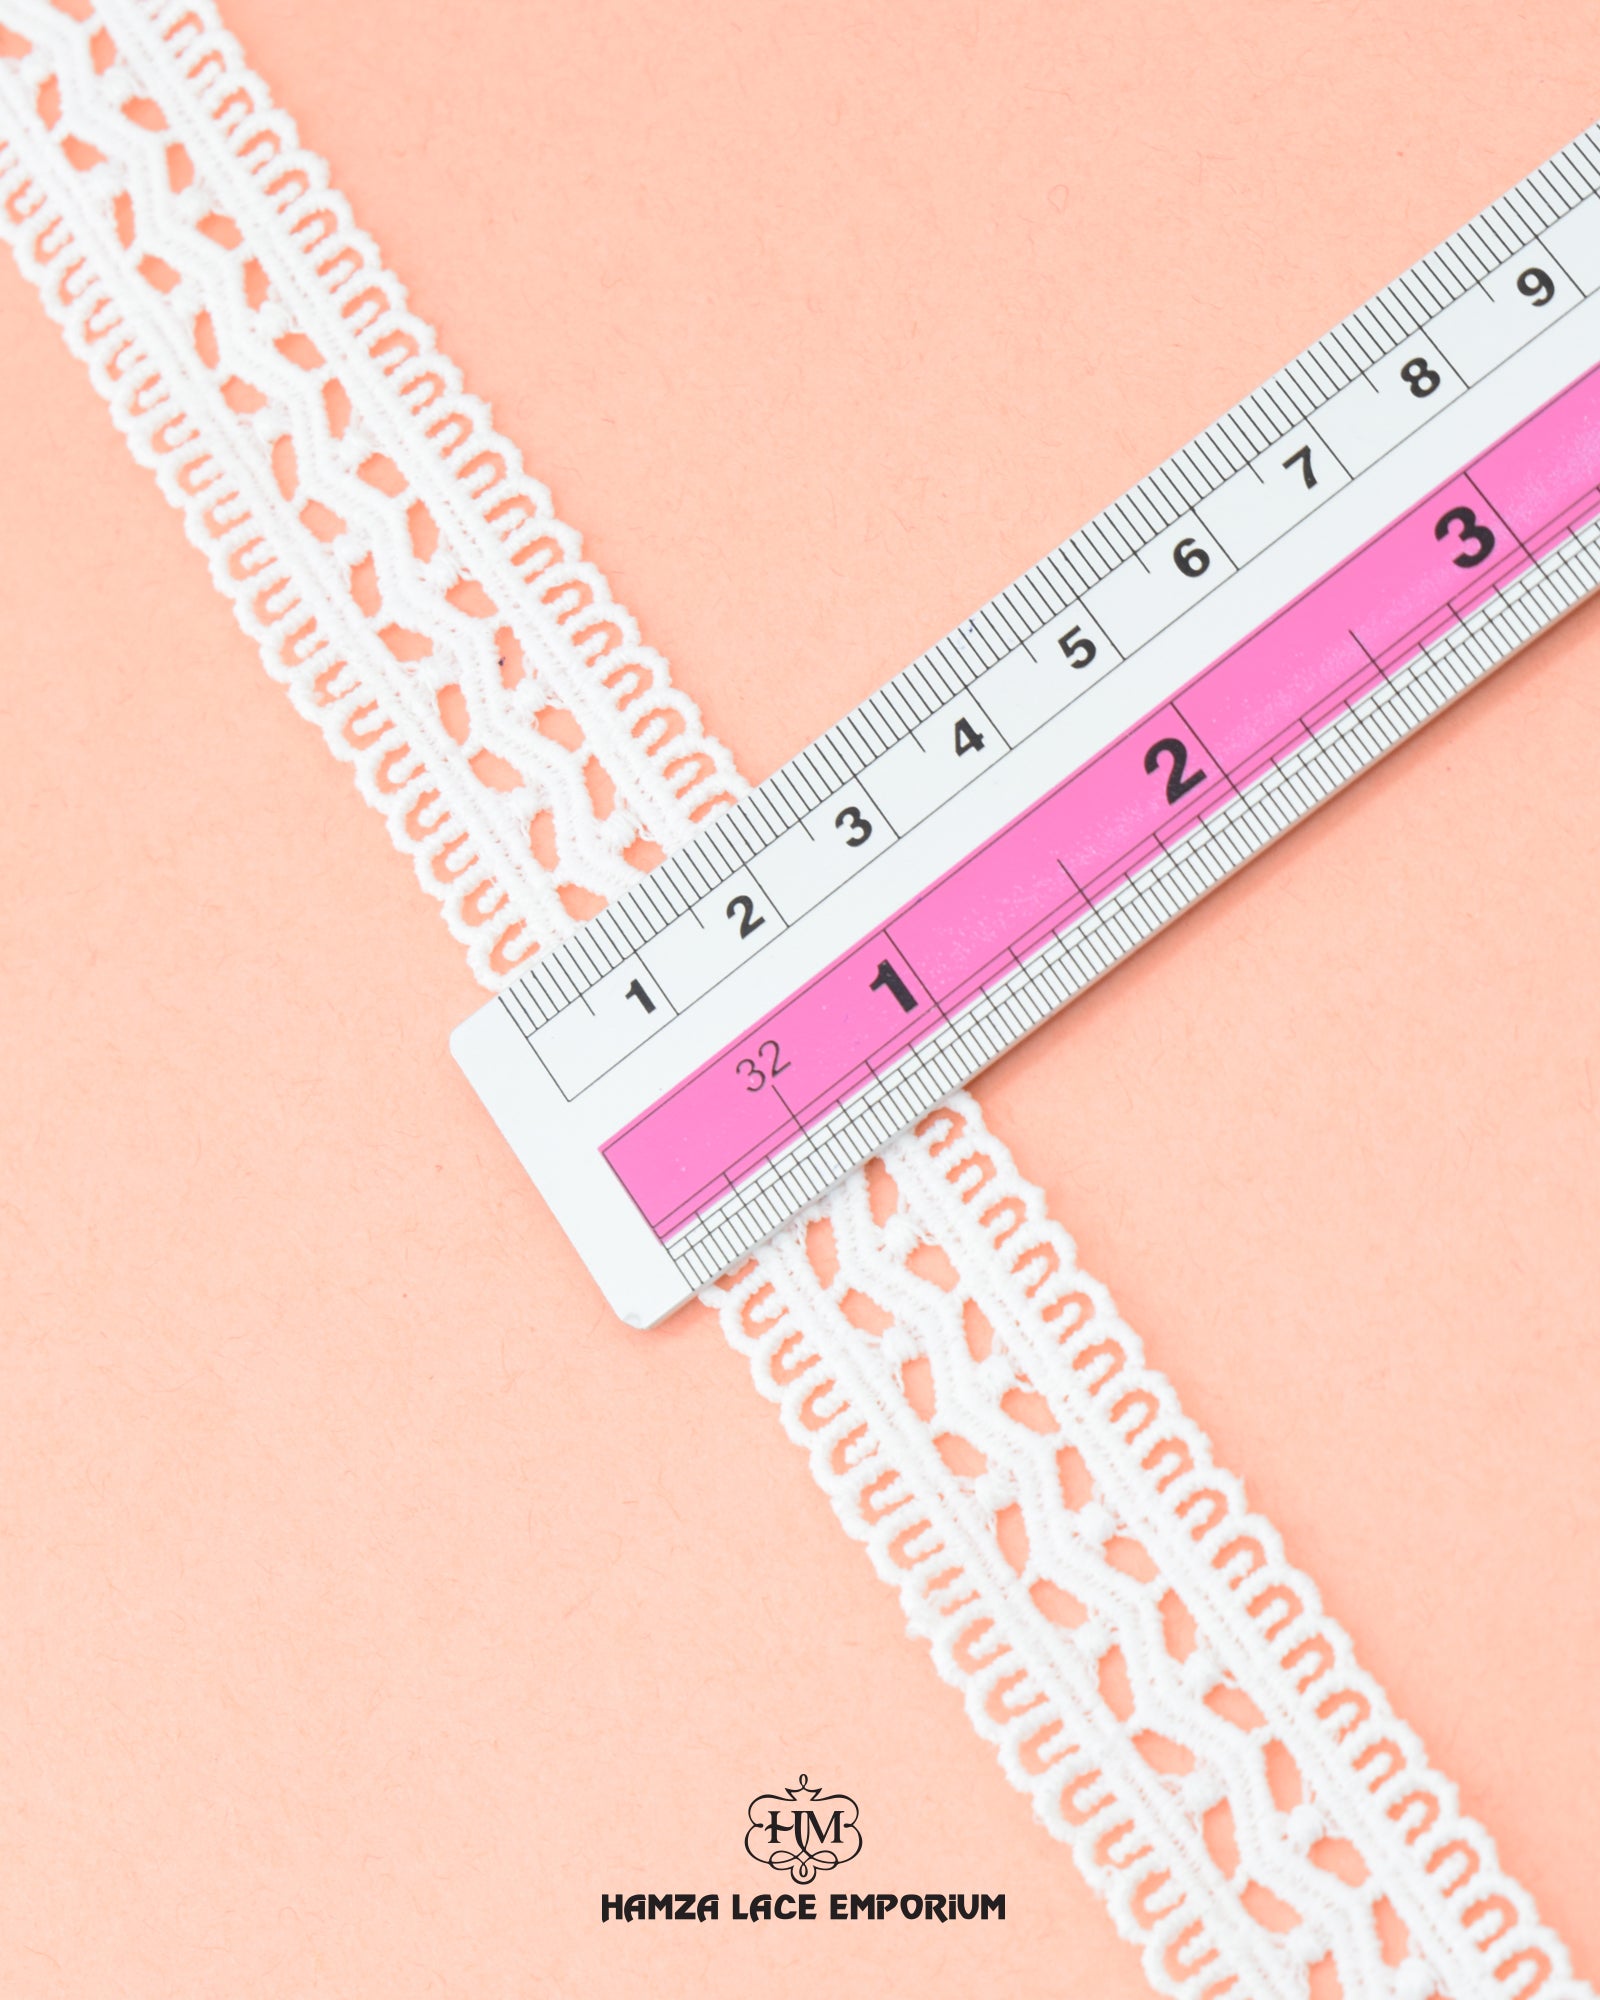 Size of the 'Two Side Filling Lace 2000' is given as 1 inch with the help of a ruler